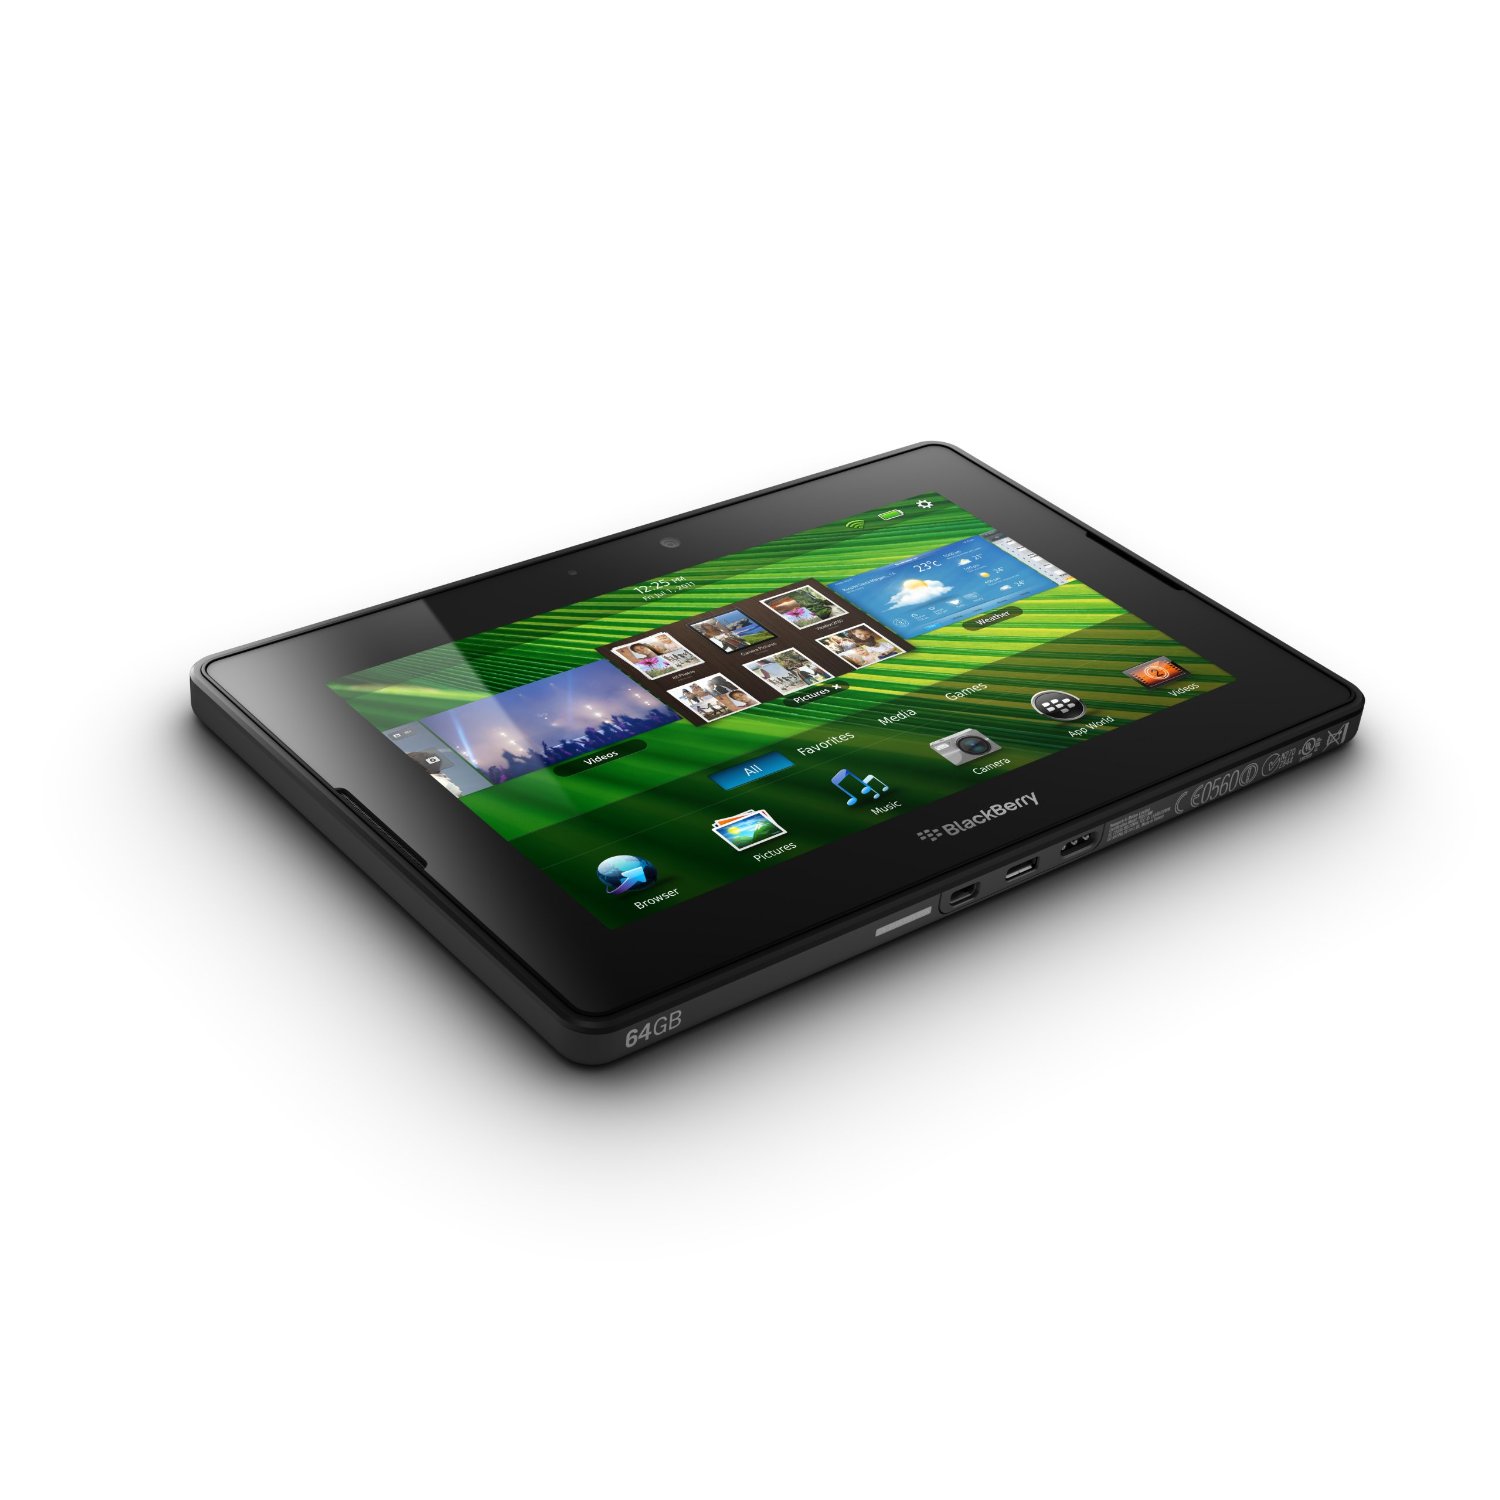 tablet blackberry playbook pc 7-inch 16gb review